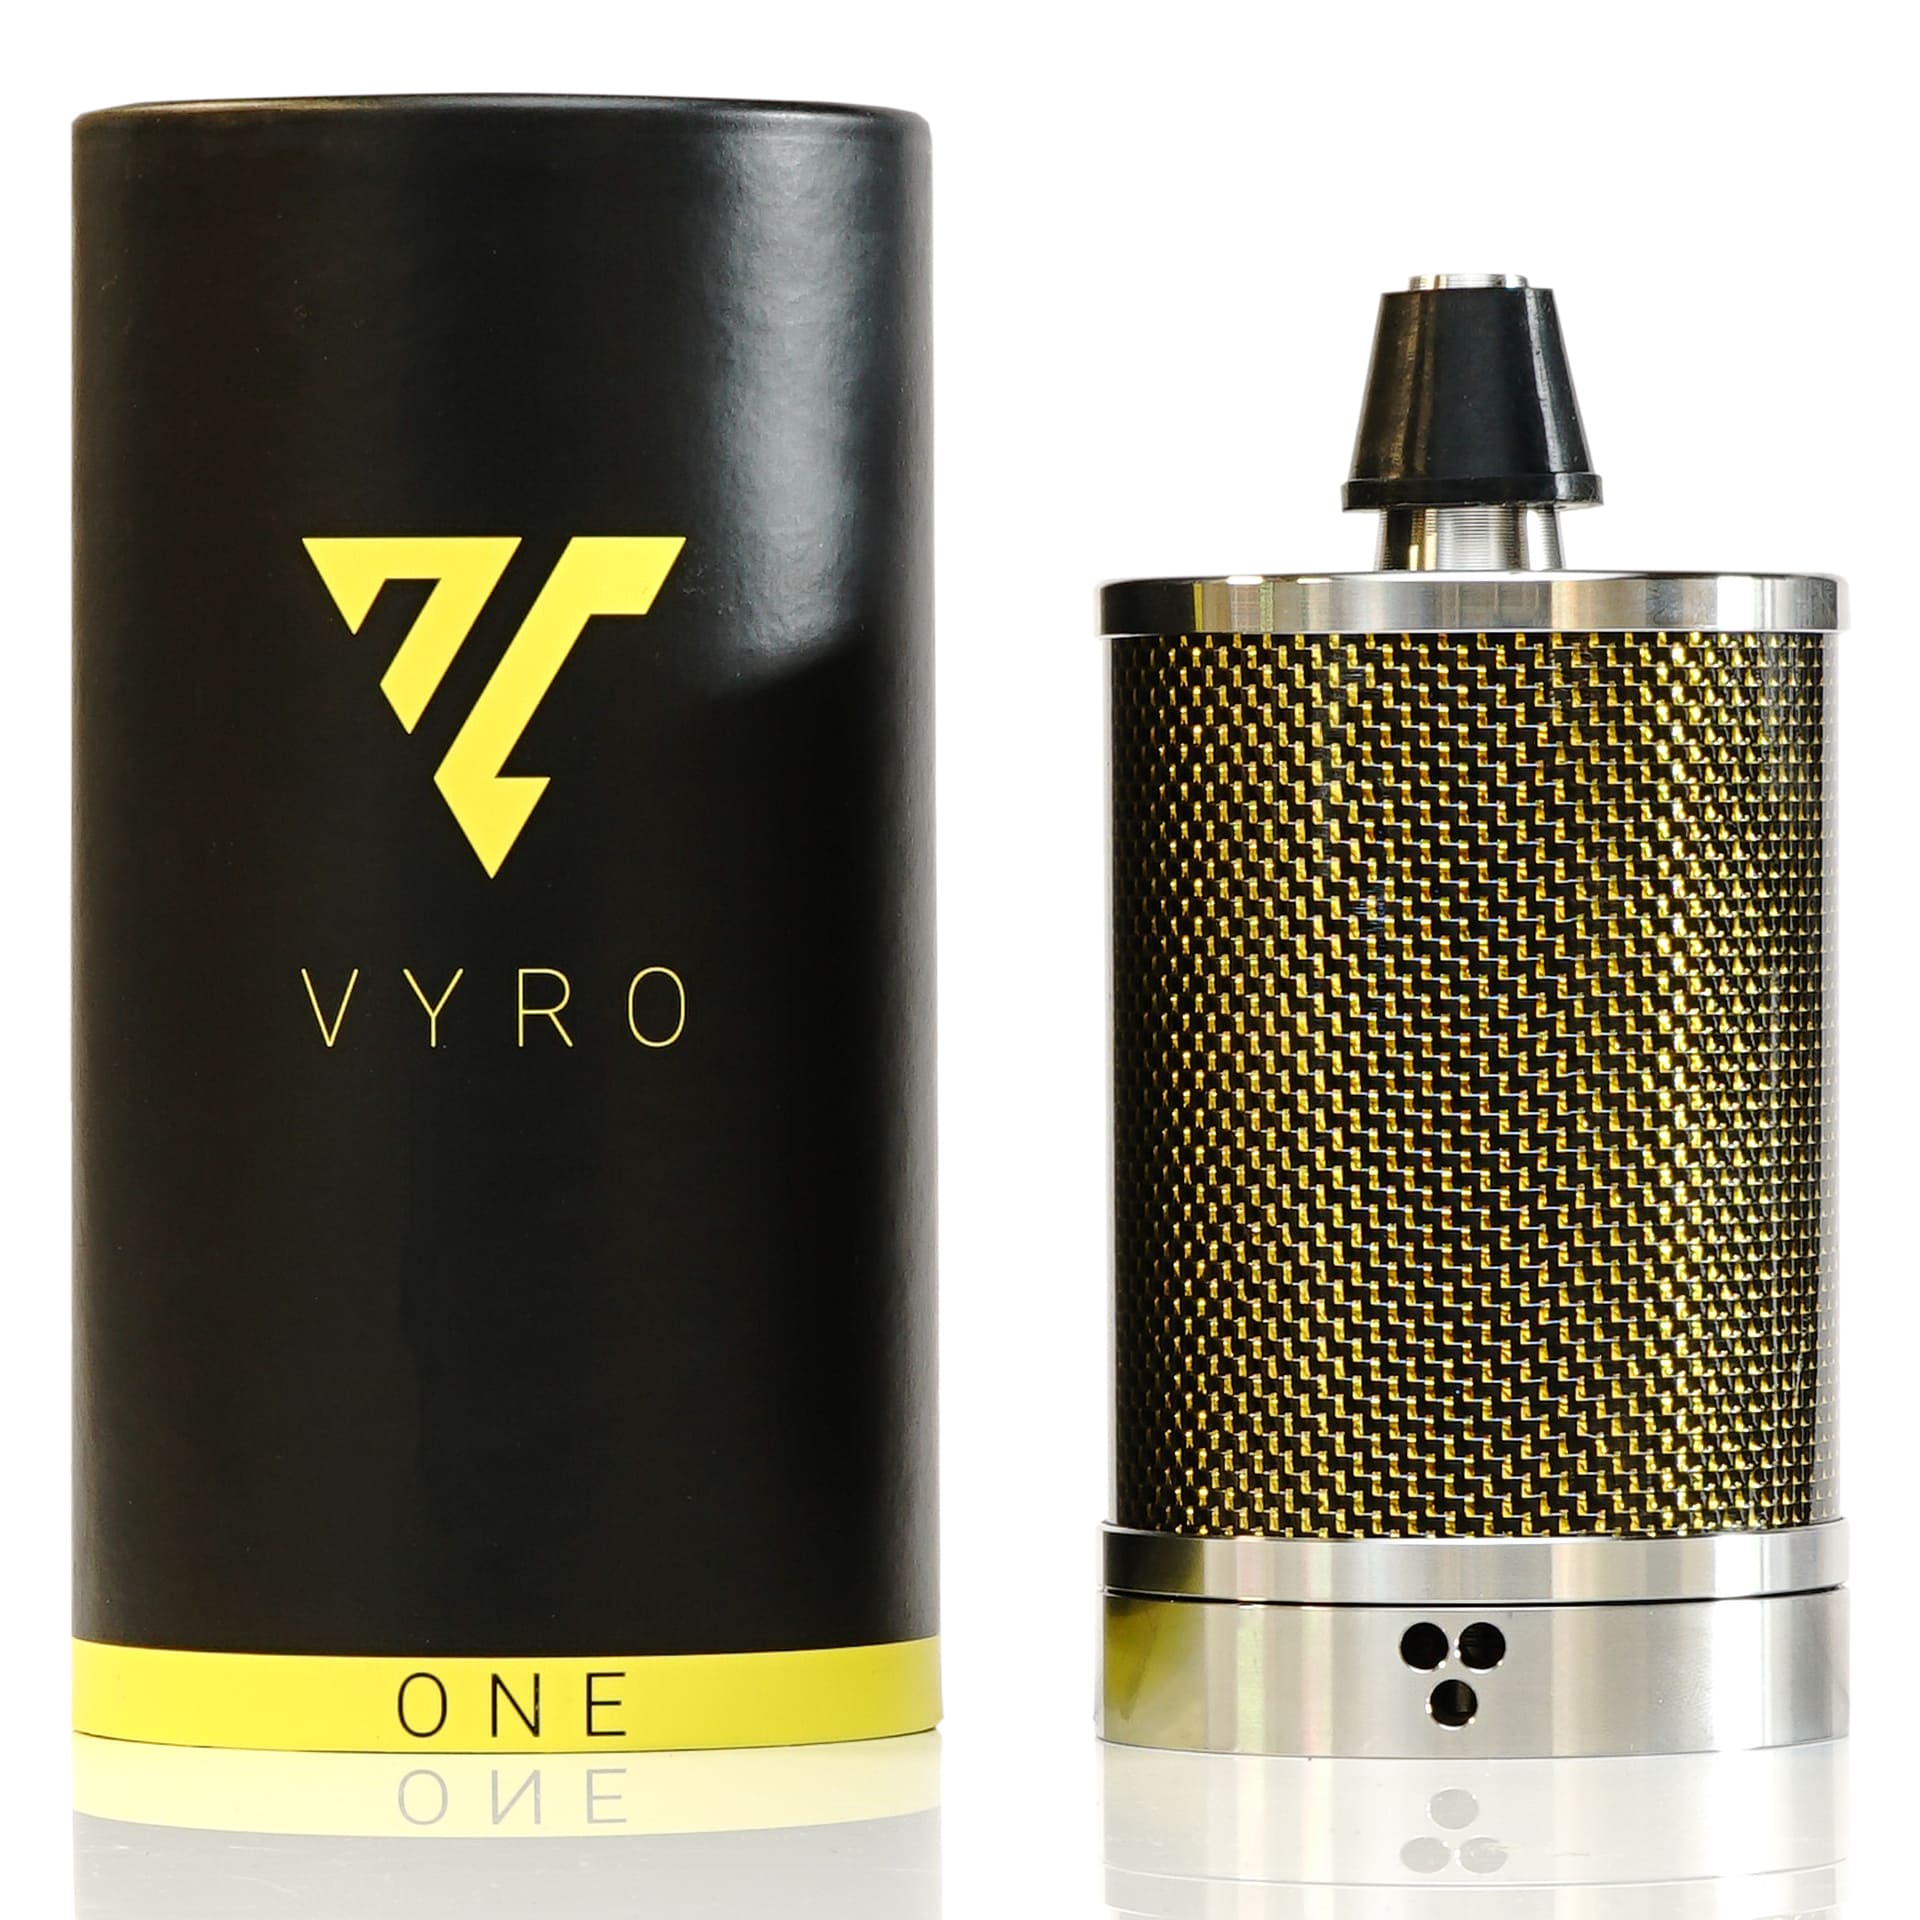 Vyro / One / Carbon Gold